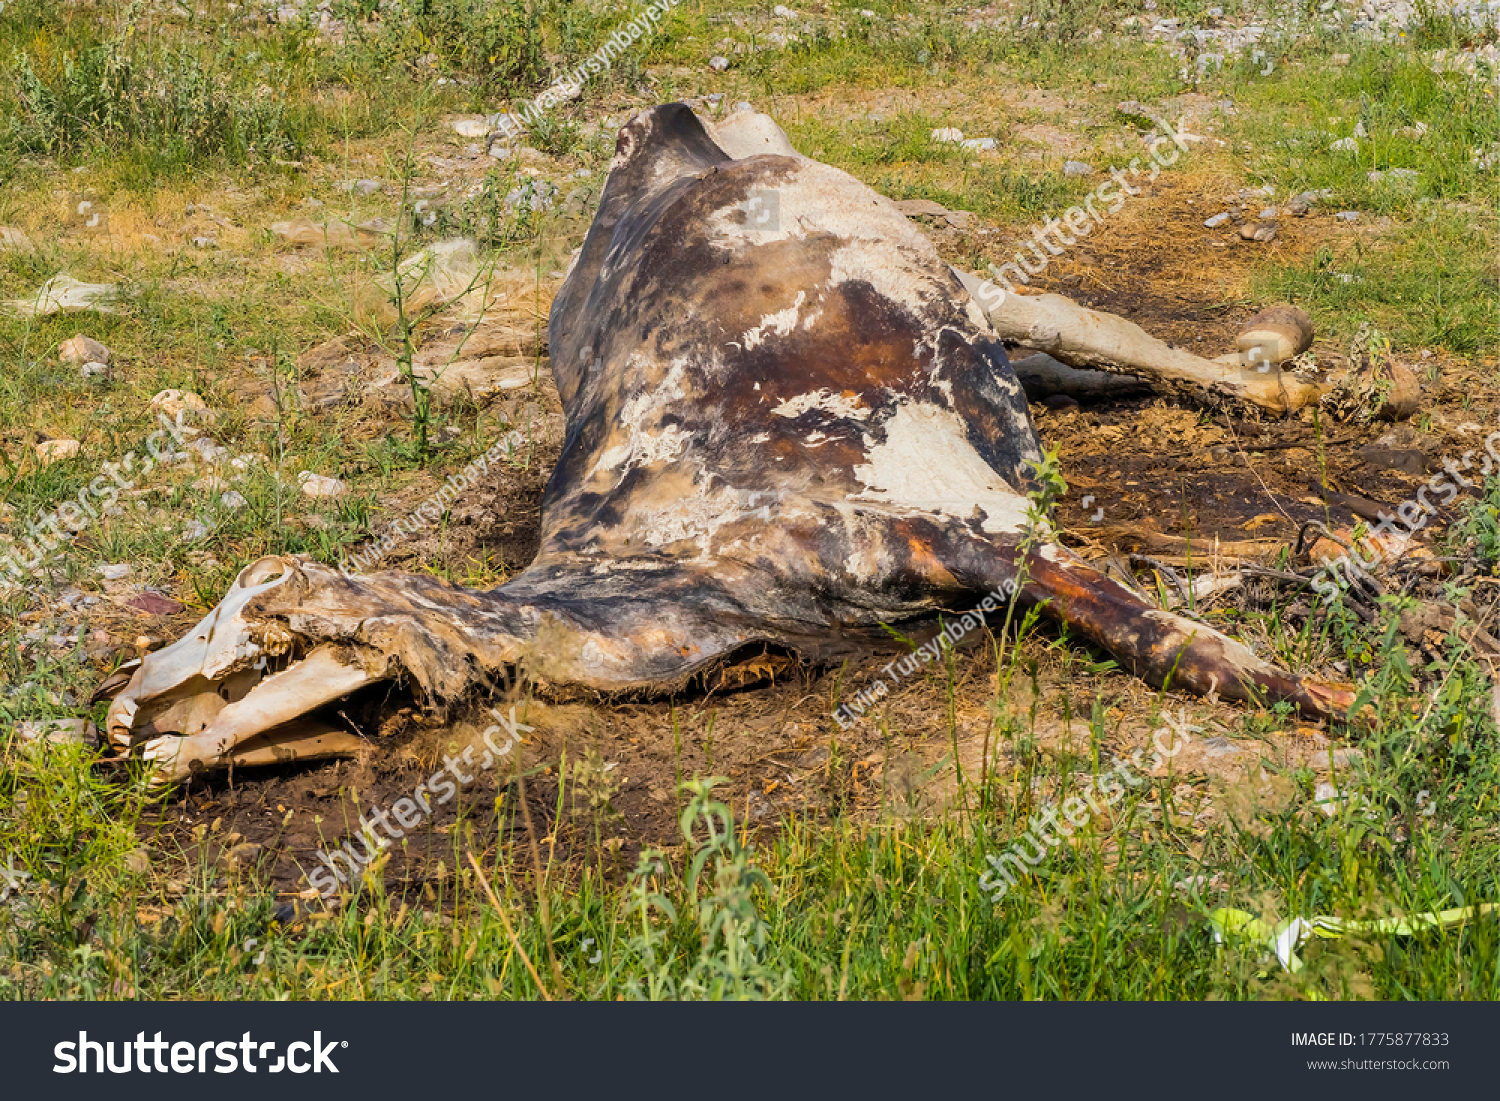 The corpse of a horse in the wild. The body of a dead horse on the ground in the grass. The corpse of a horse decays. Cadaverous spots on the skin. Skeleton of a horse. Bones, hair next to the corpse #1775877833